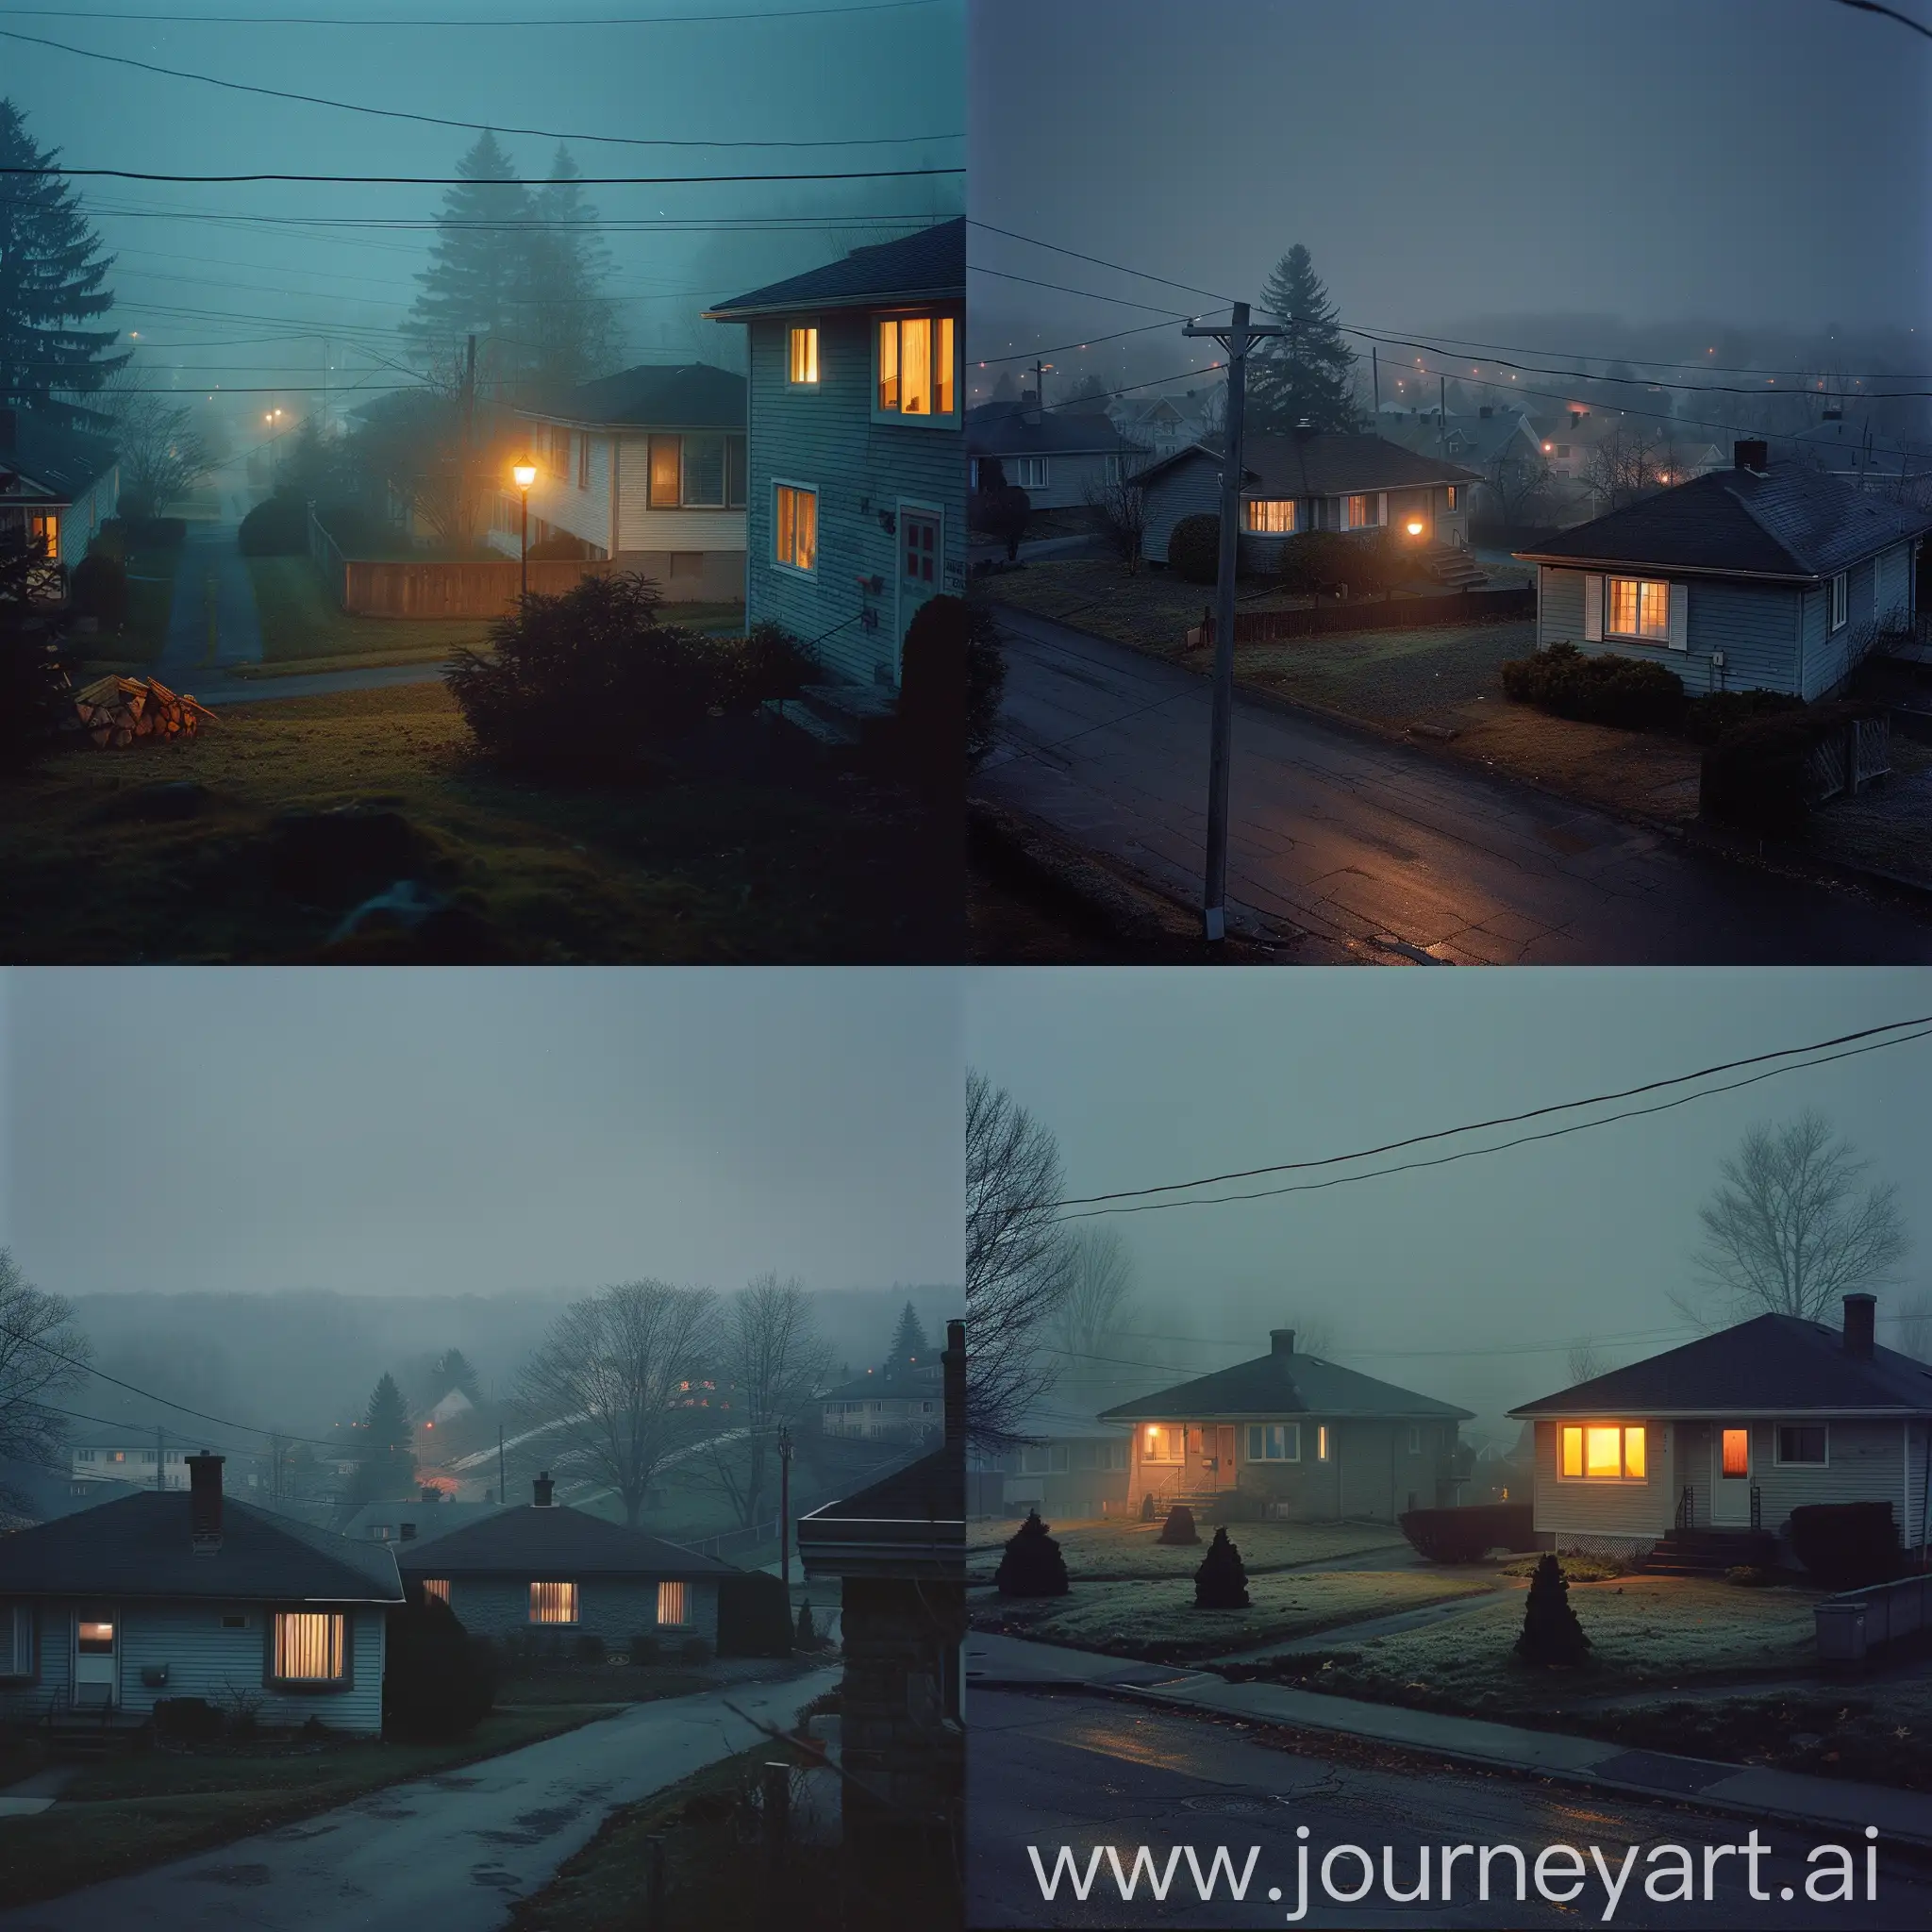 depict a photograph made on large format film camera with portra 800 of a residential neighborhood with quebec 1950's bungalows  interior light on and moody fog at night. Inspired by todd hido